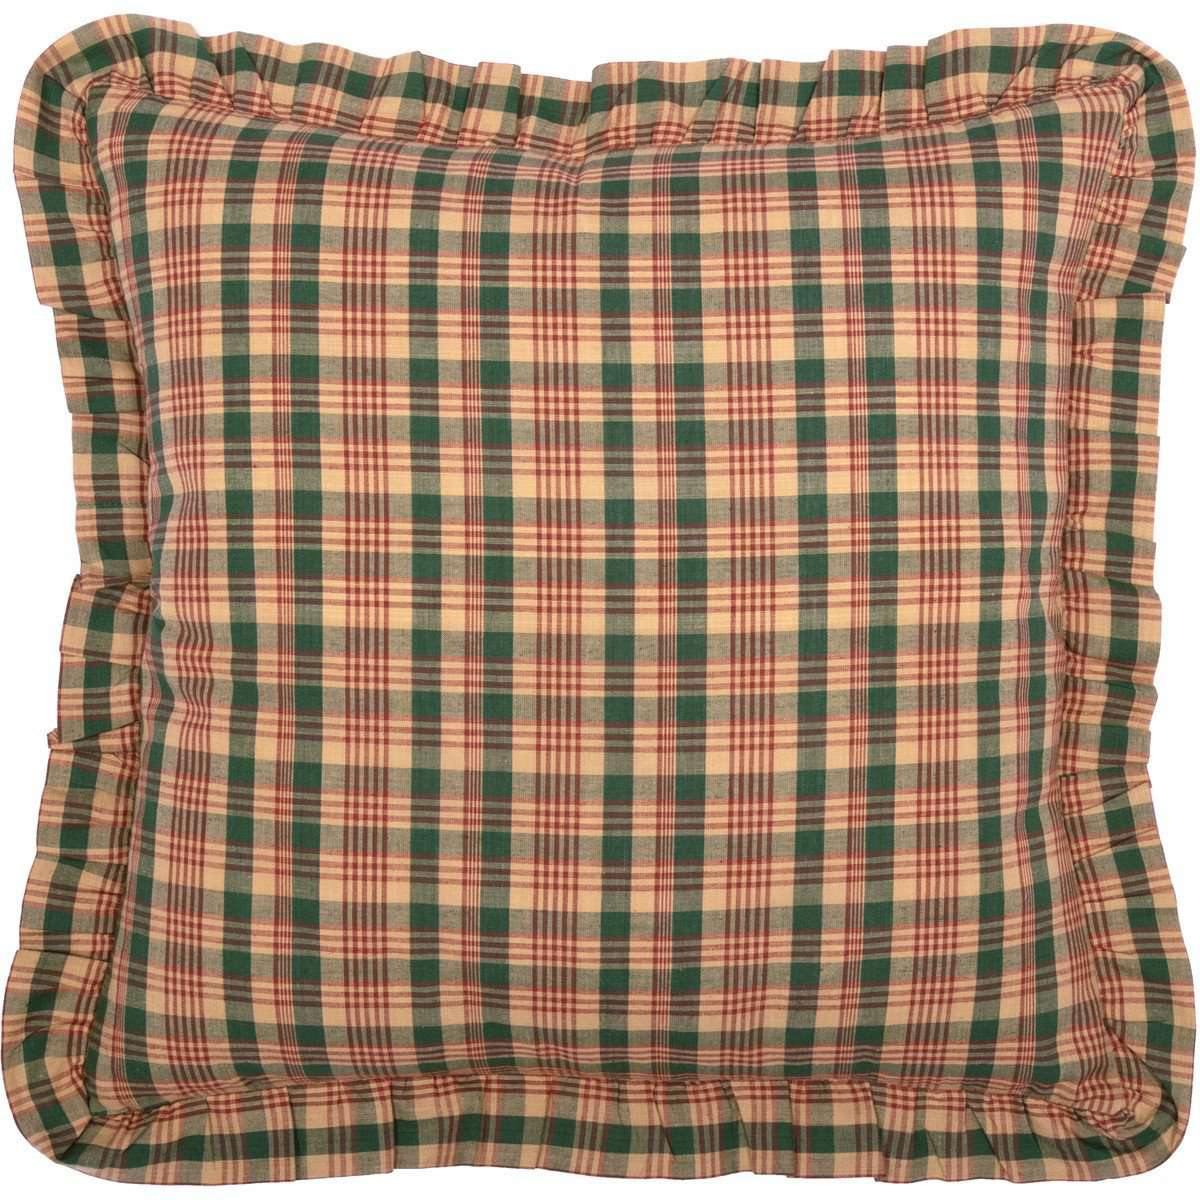 RUSTIC PLAID PATCH PILLOW COVER 18X18